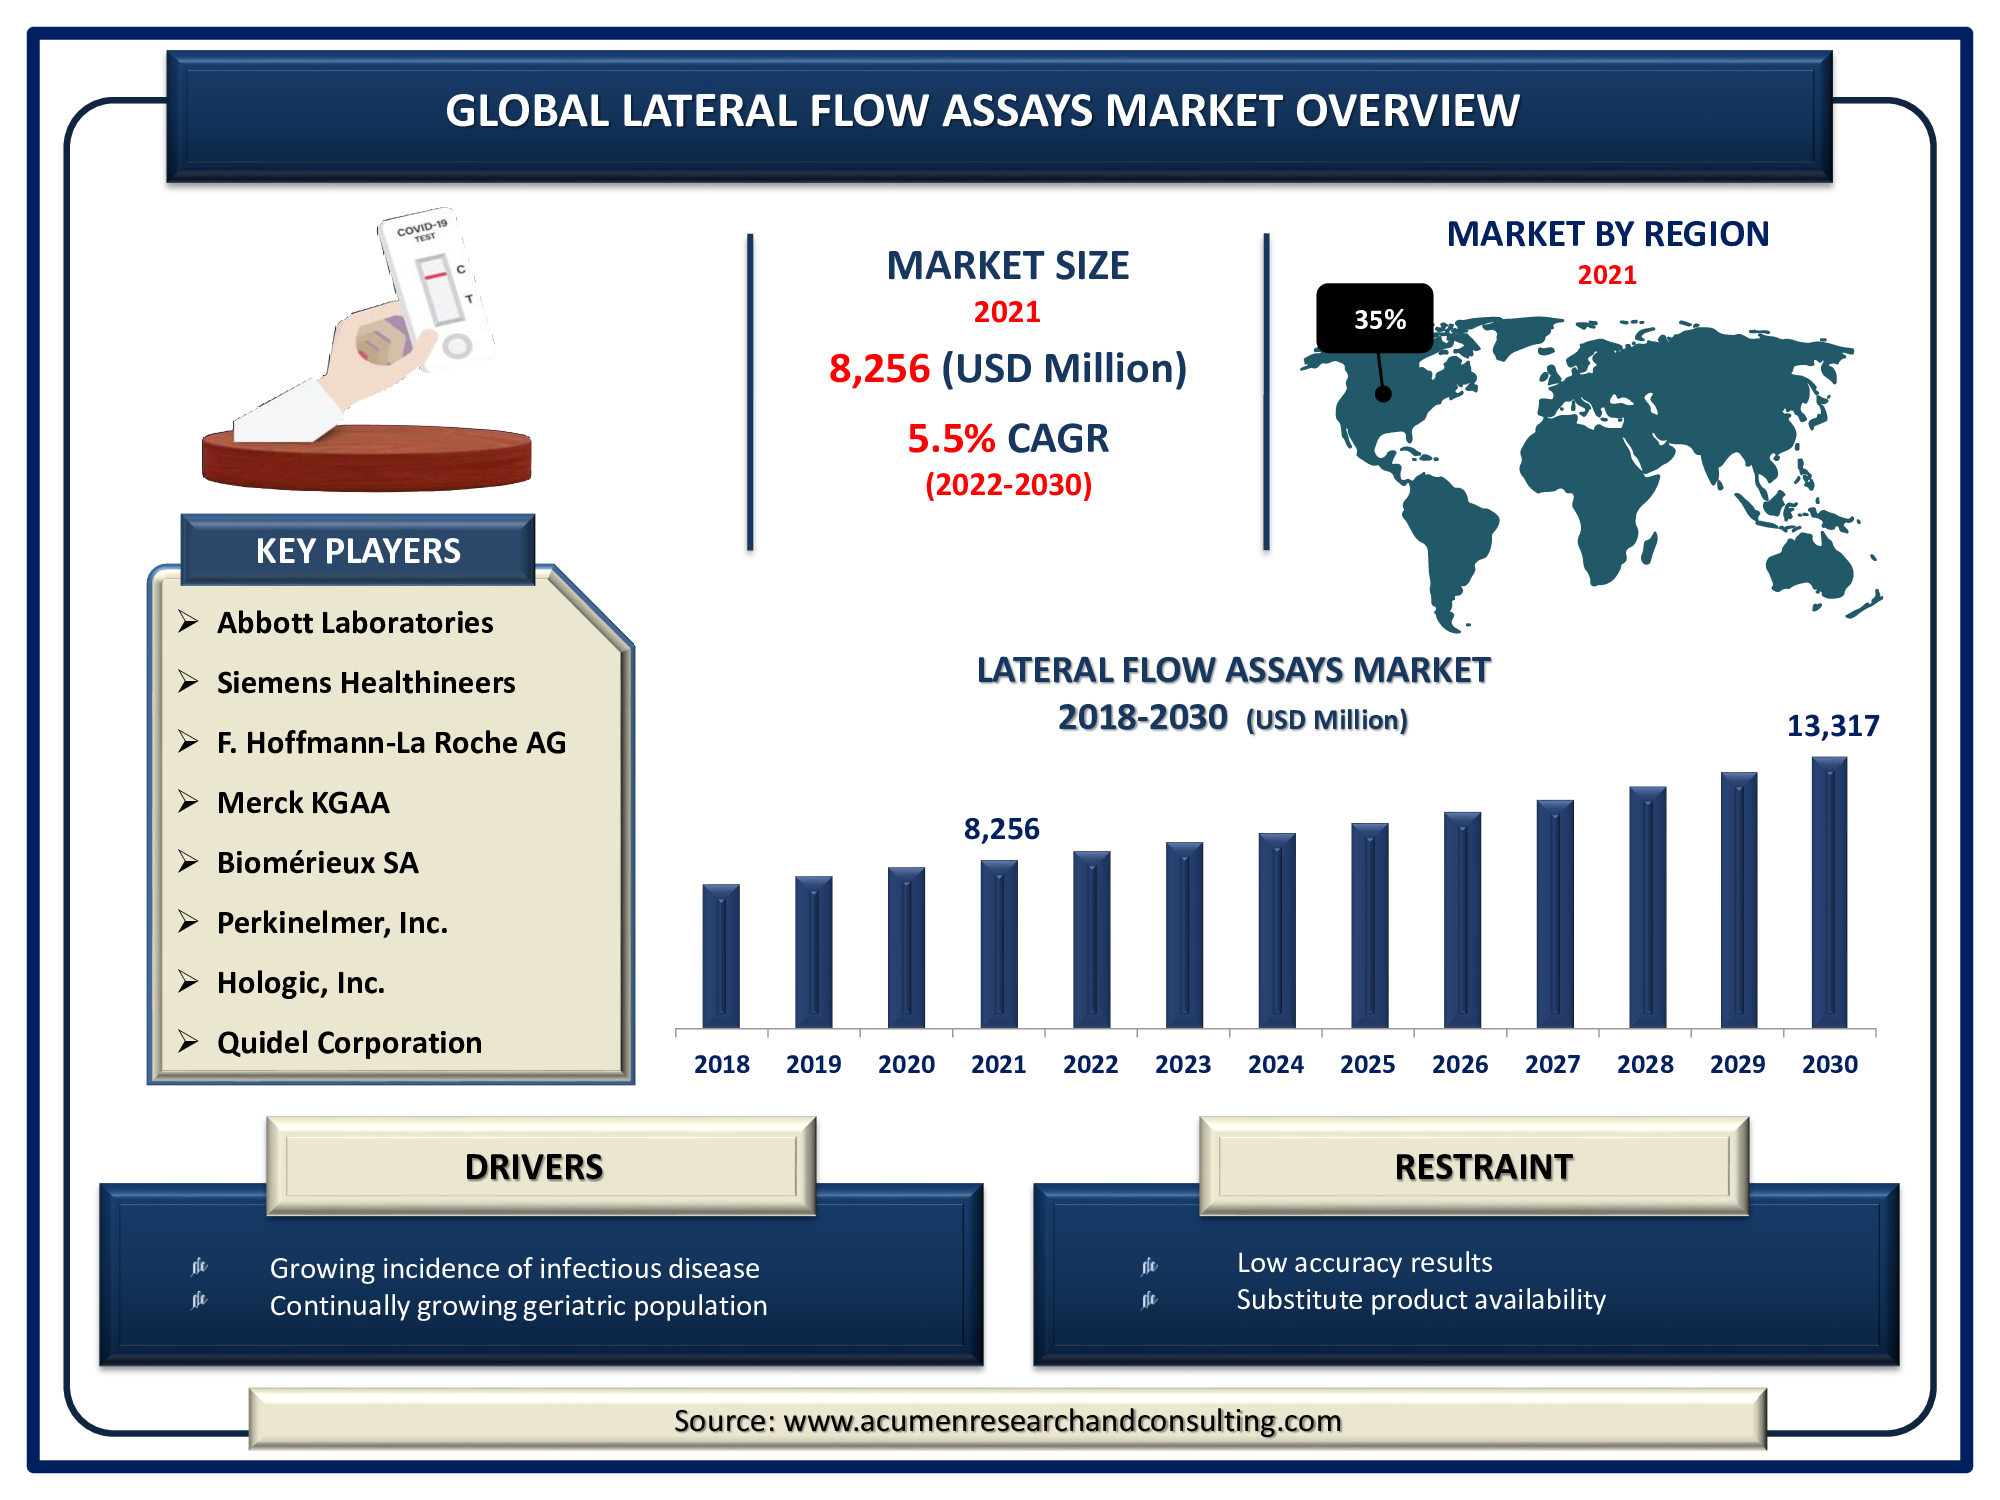 Lateral Flow Assays Market is expected to reach USD 13,317 Million by 2030, growing at a CAGR of 5.5%